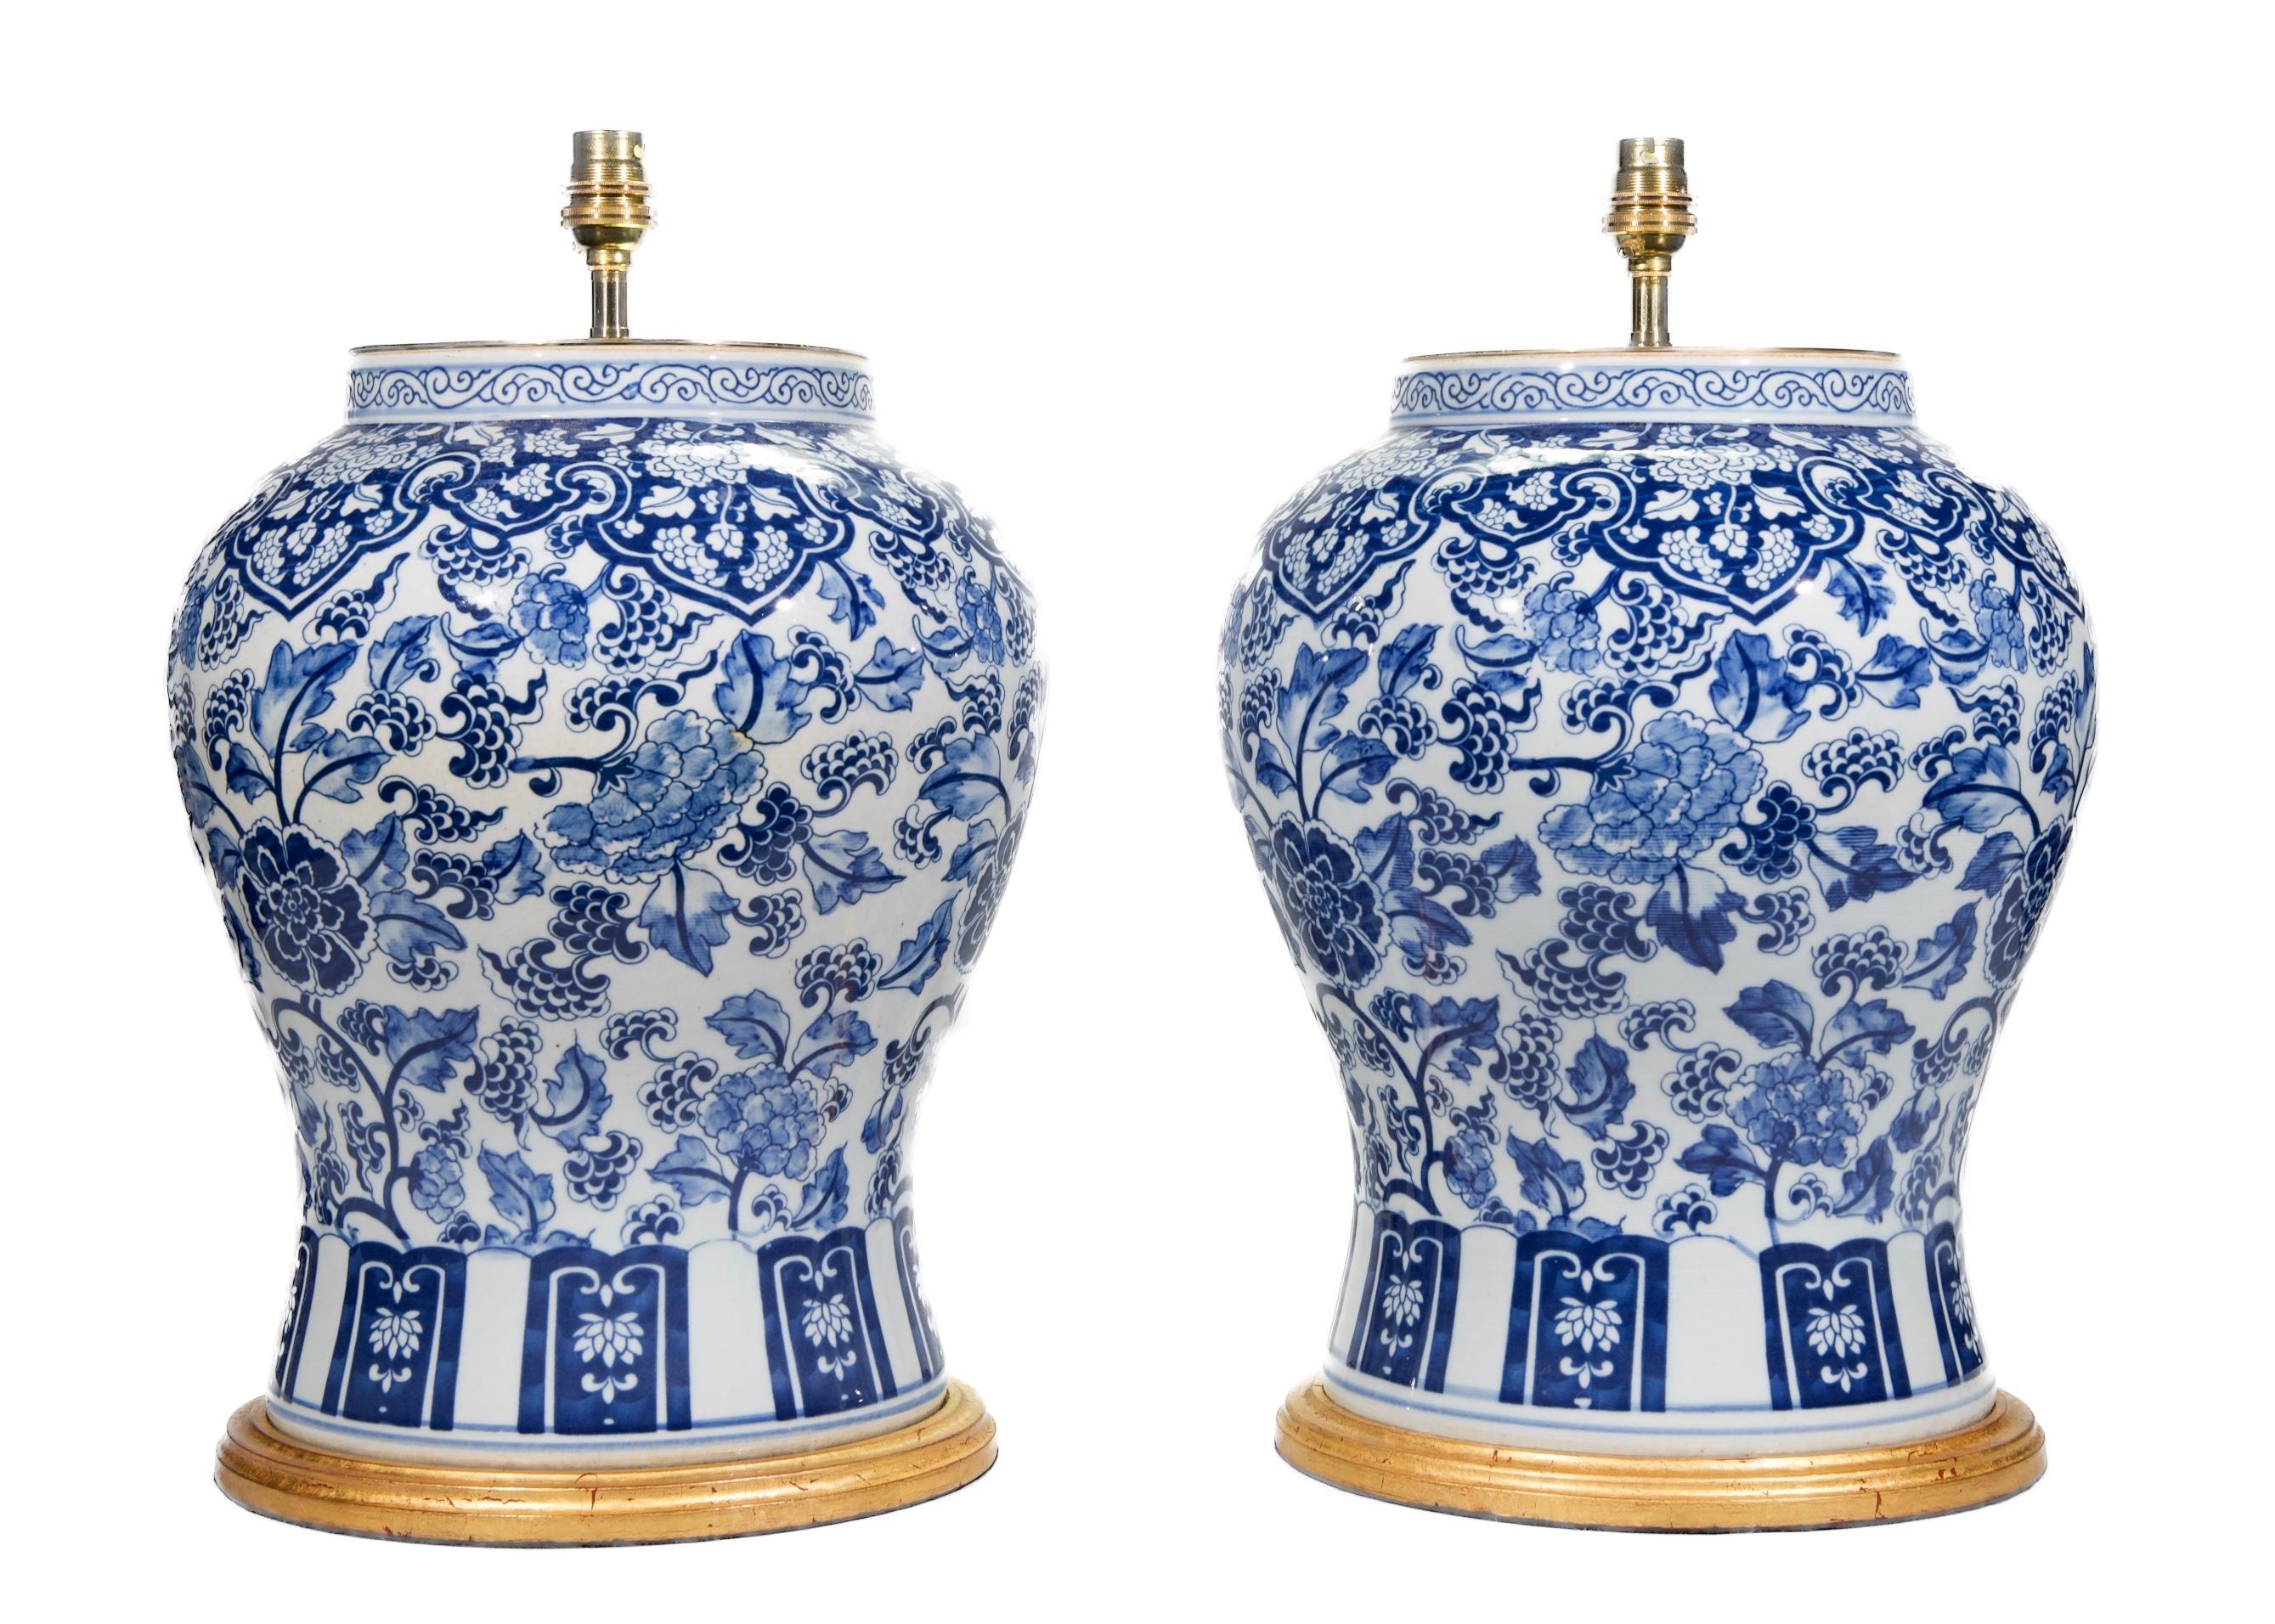 A fine pair of blue and white temple vases, decorated throughout in the Kangxi manner with stylised floraland foliate decoration in tones of blue on a white background, now mounted as lamps with hand gilded bases.

Height of vases: 14 3/4 in (37 cm)